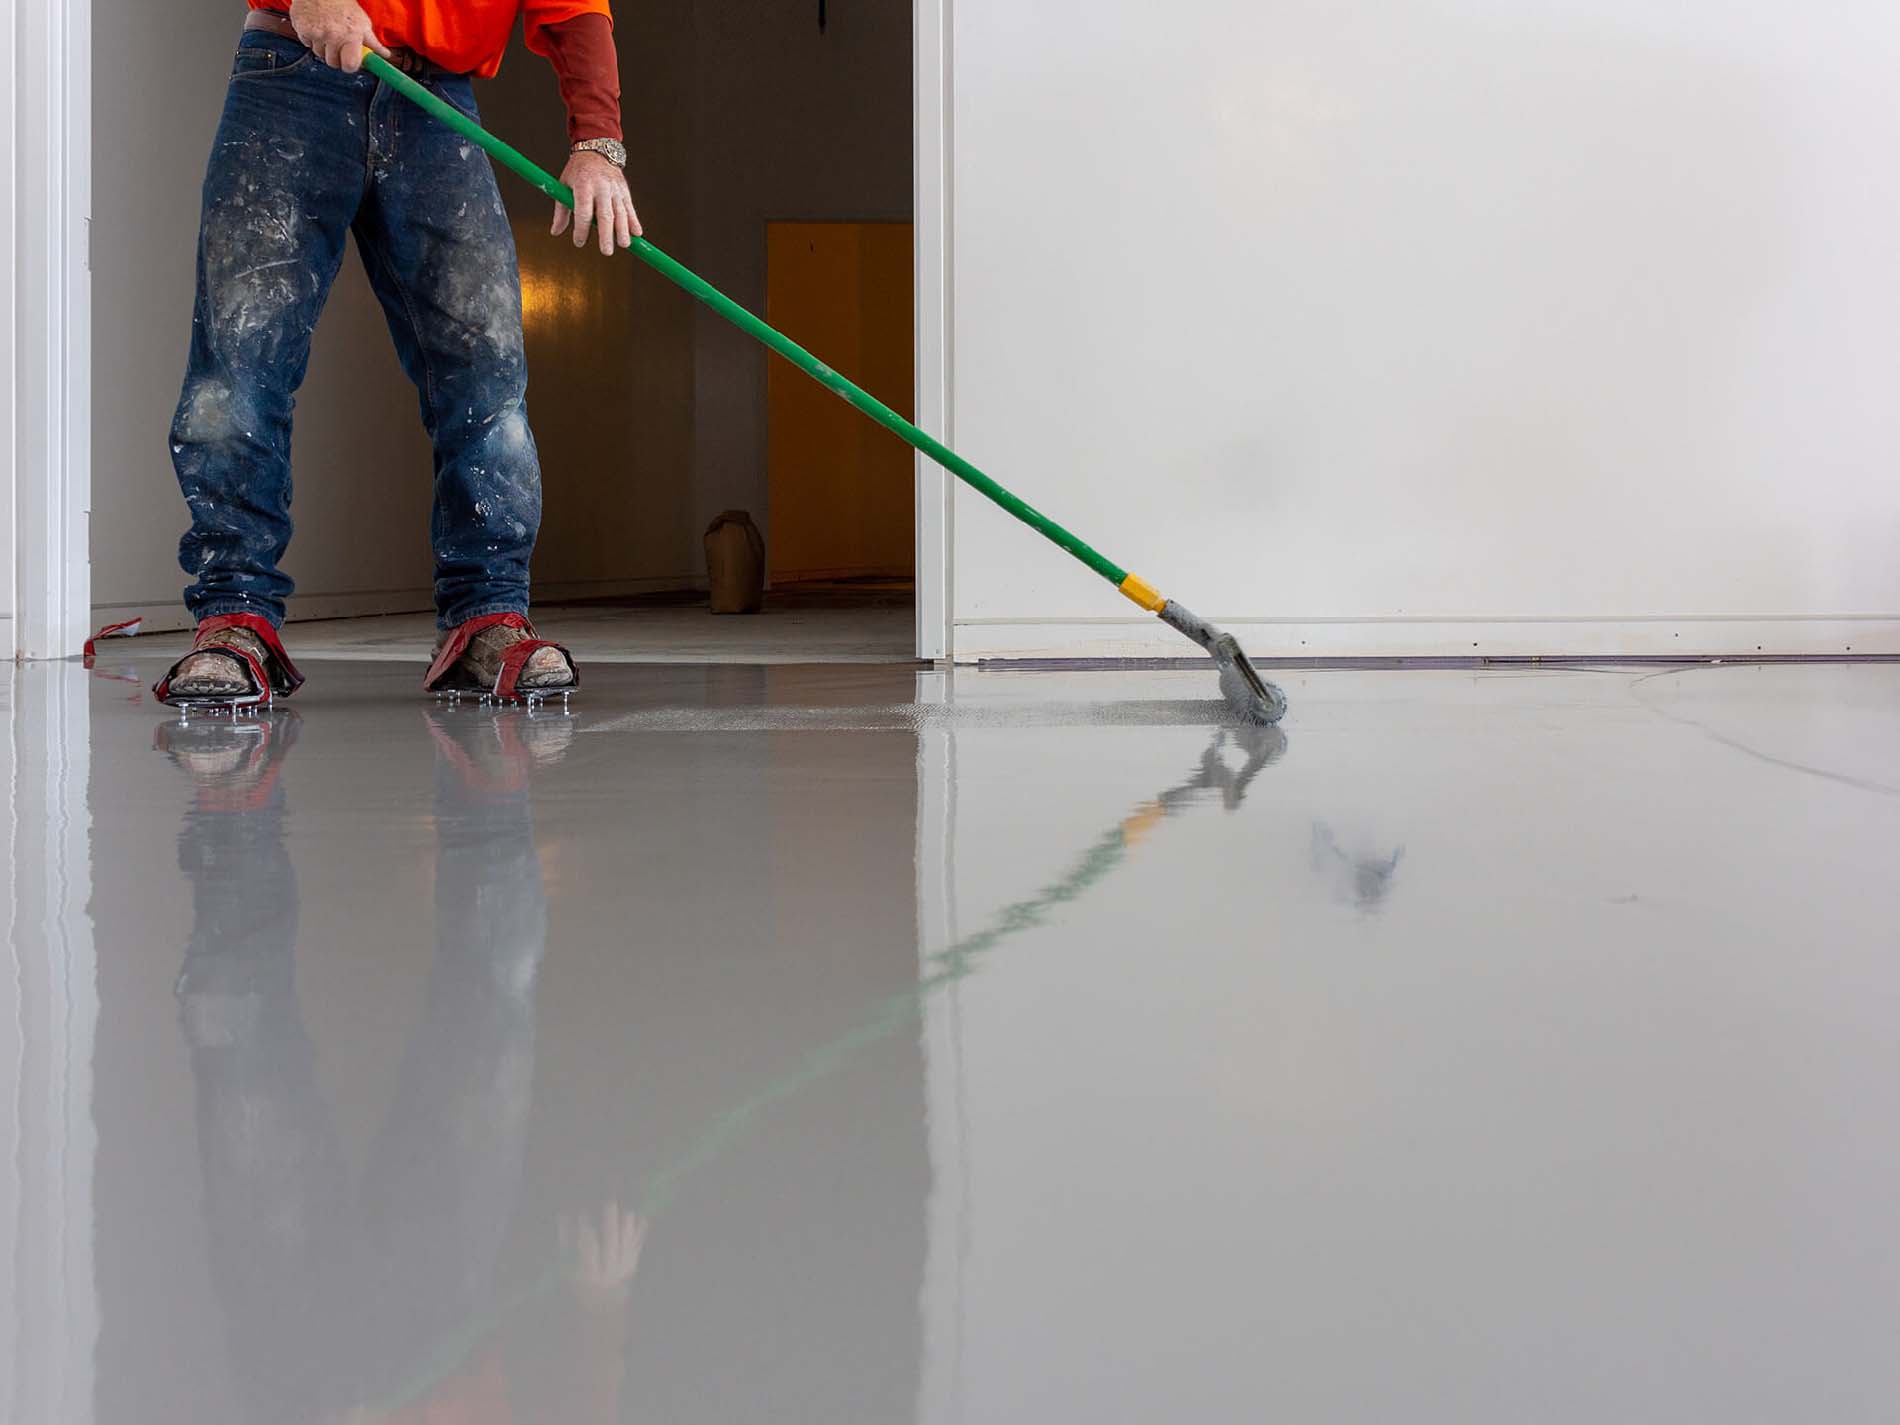 Experience the Benefits of Epoxy Flooring For Food Processing 